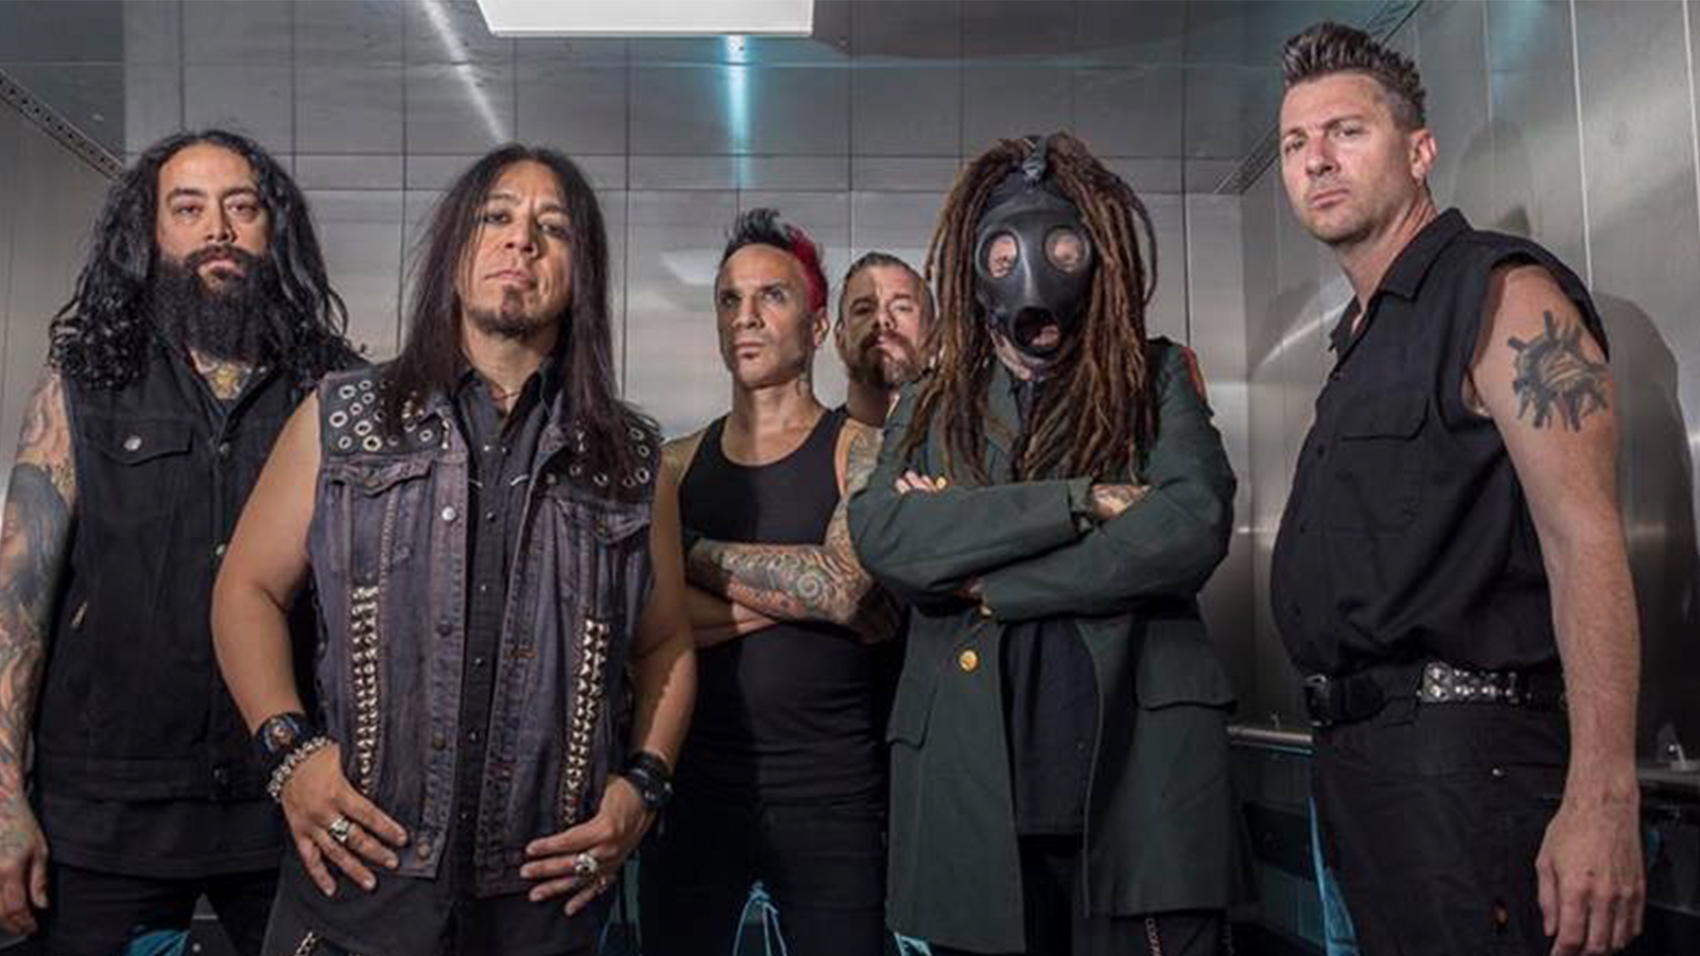 ministry-s-new-album-will-be-an-awesome-thing-to-taste-riot-fest